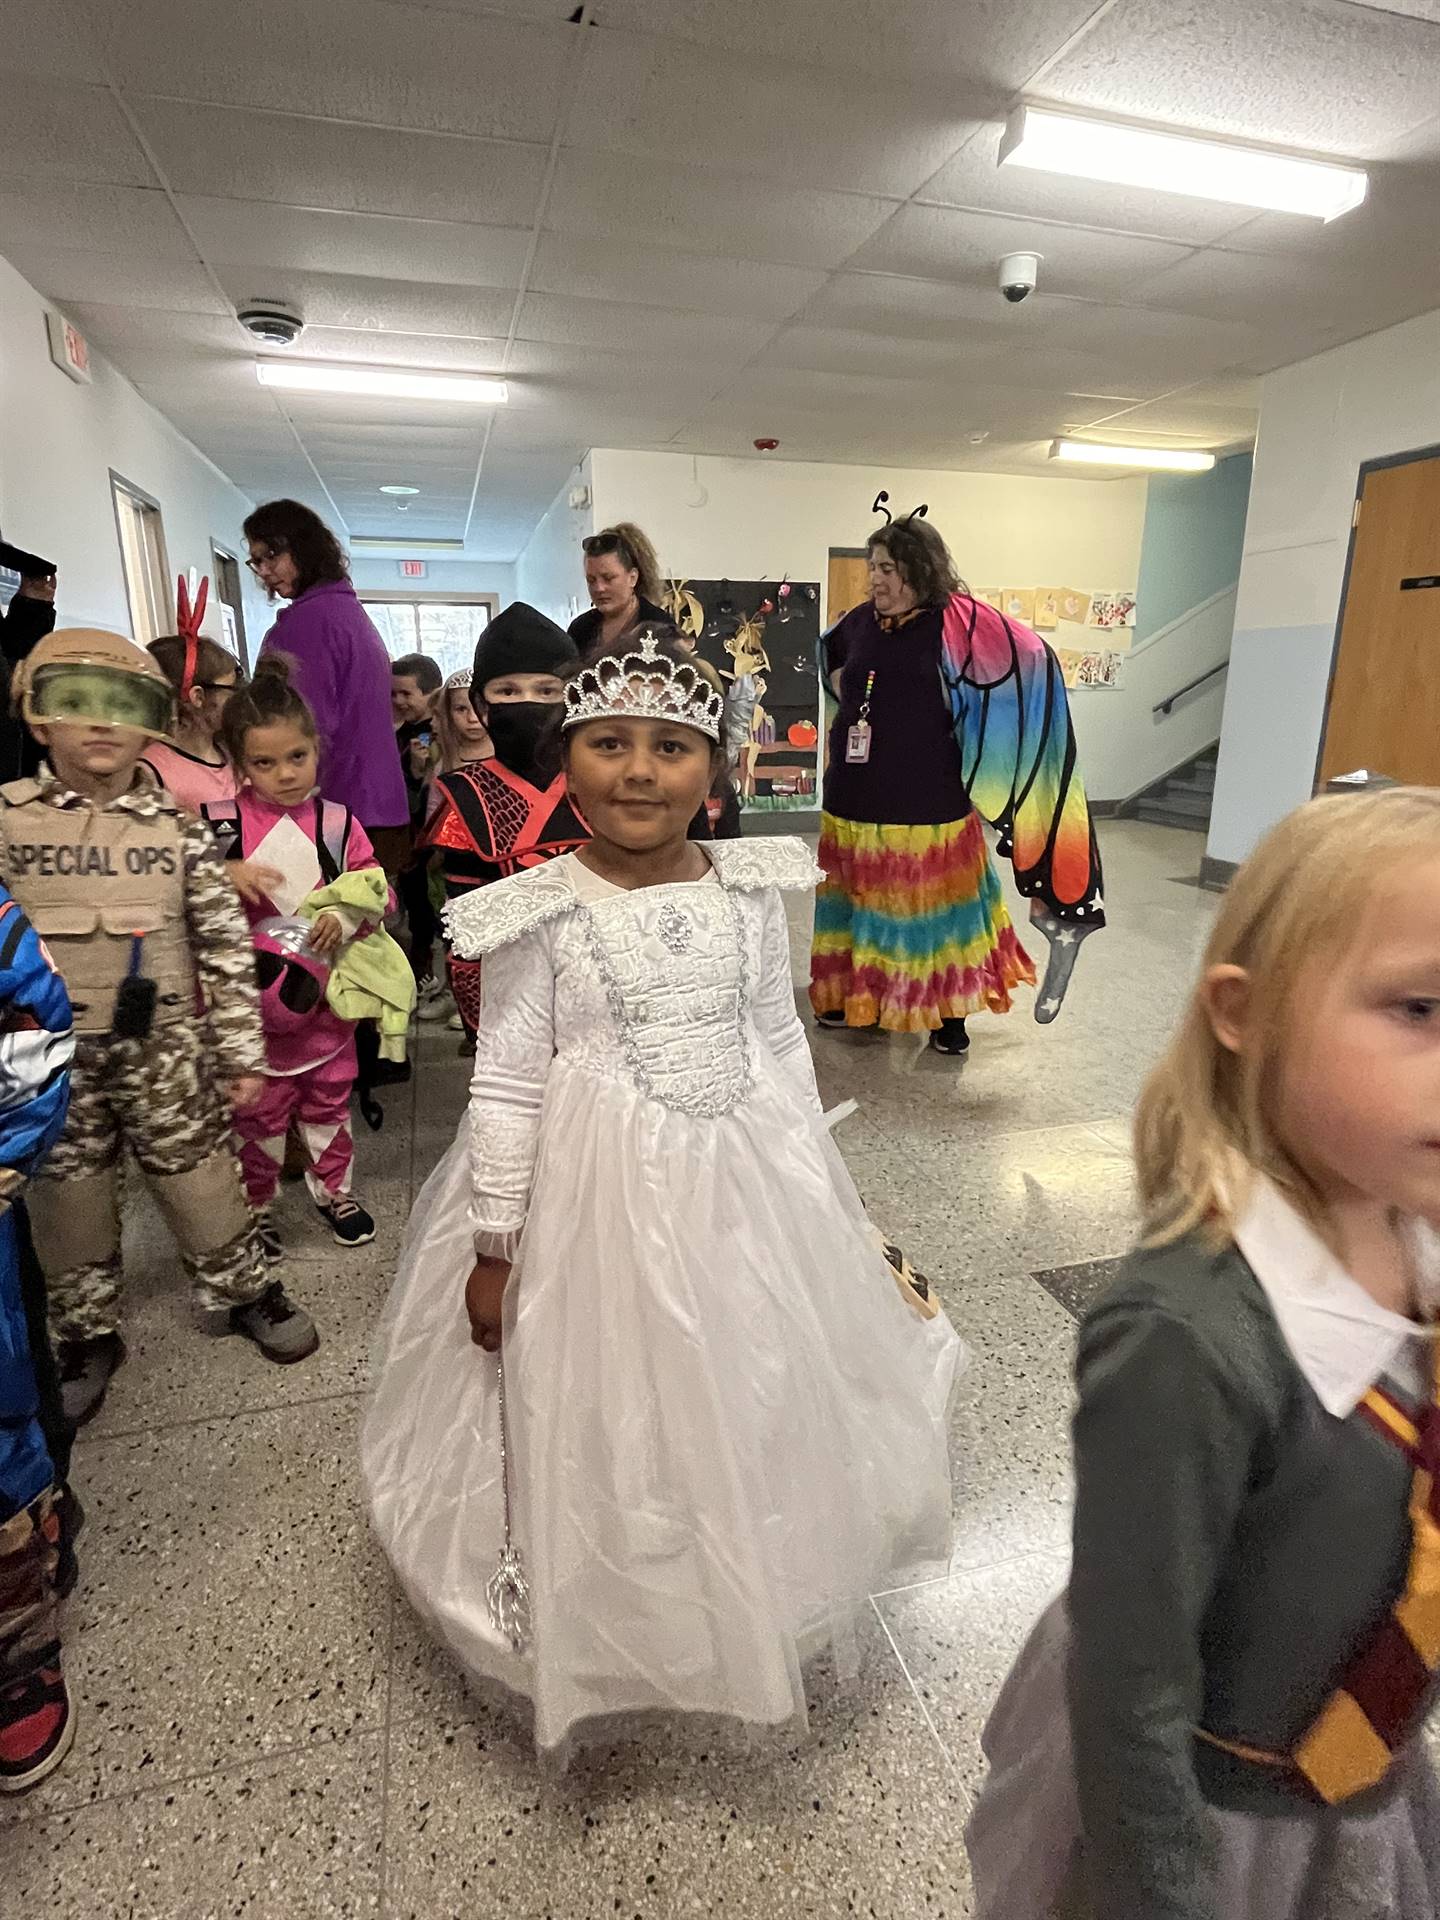 group of students dressed up for Halloween